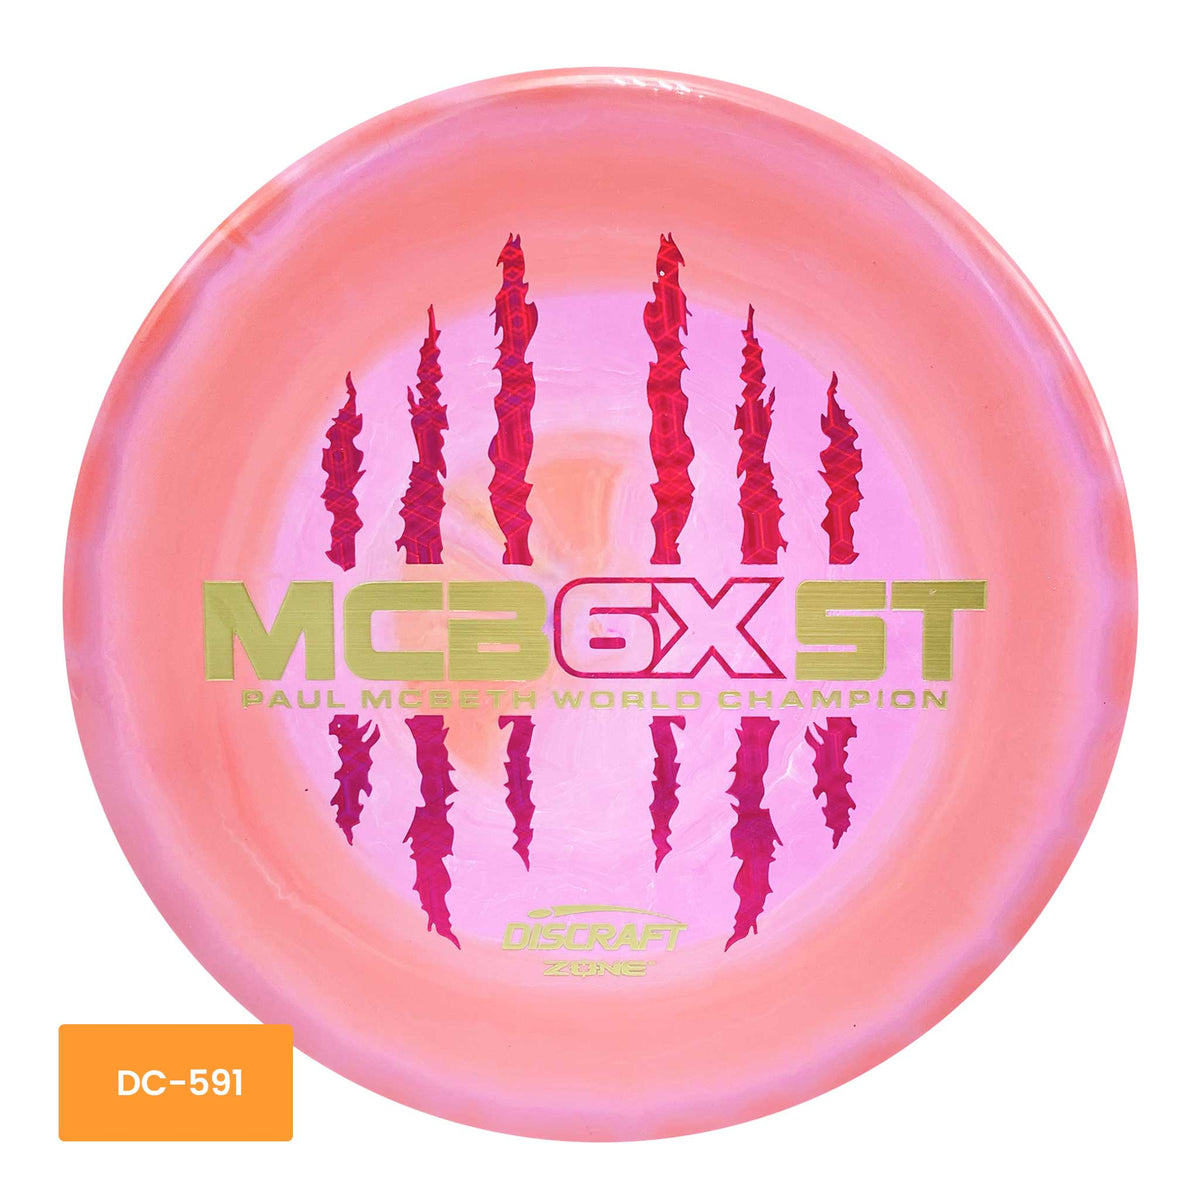 Discraft Paul McBeth MCB6XST ESP Zone putter and approach - Pink